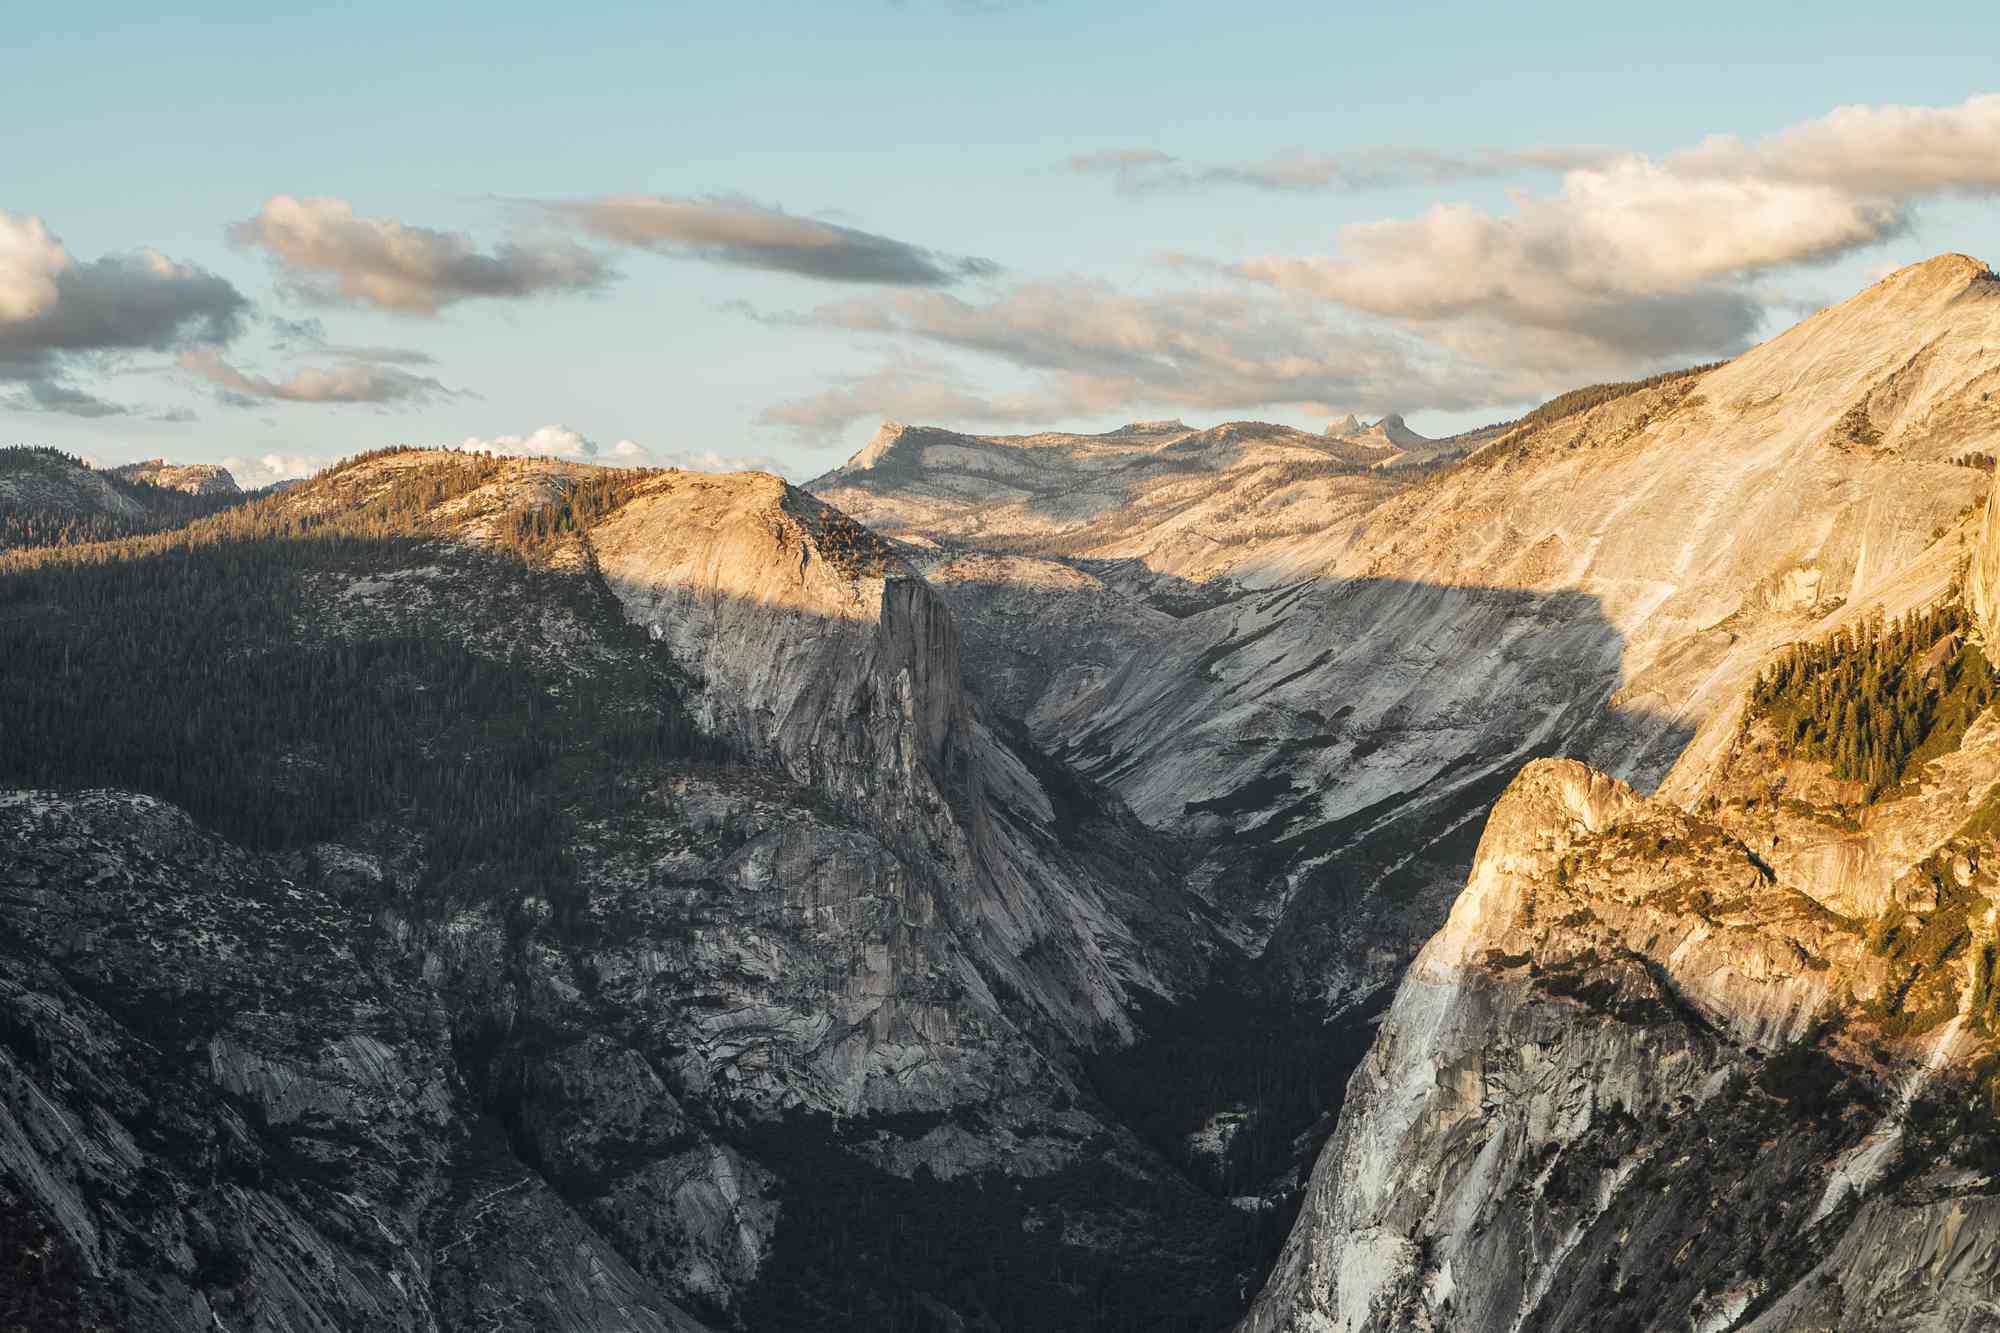 How to Plan the Perfect Trip to Yosemite National Park, According to Naturalists and Park Experts